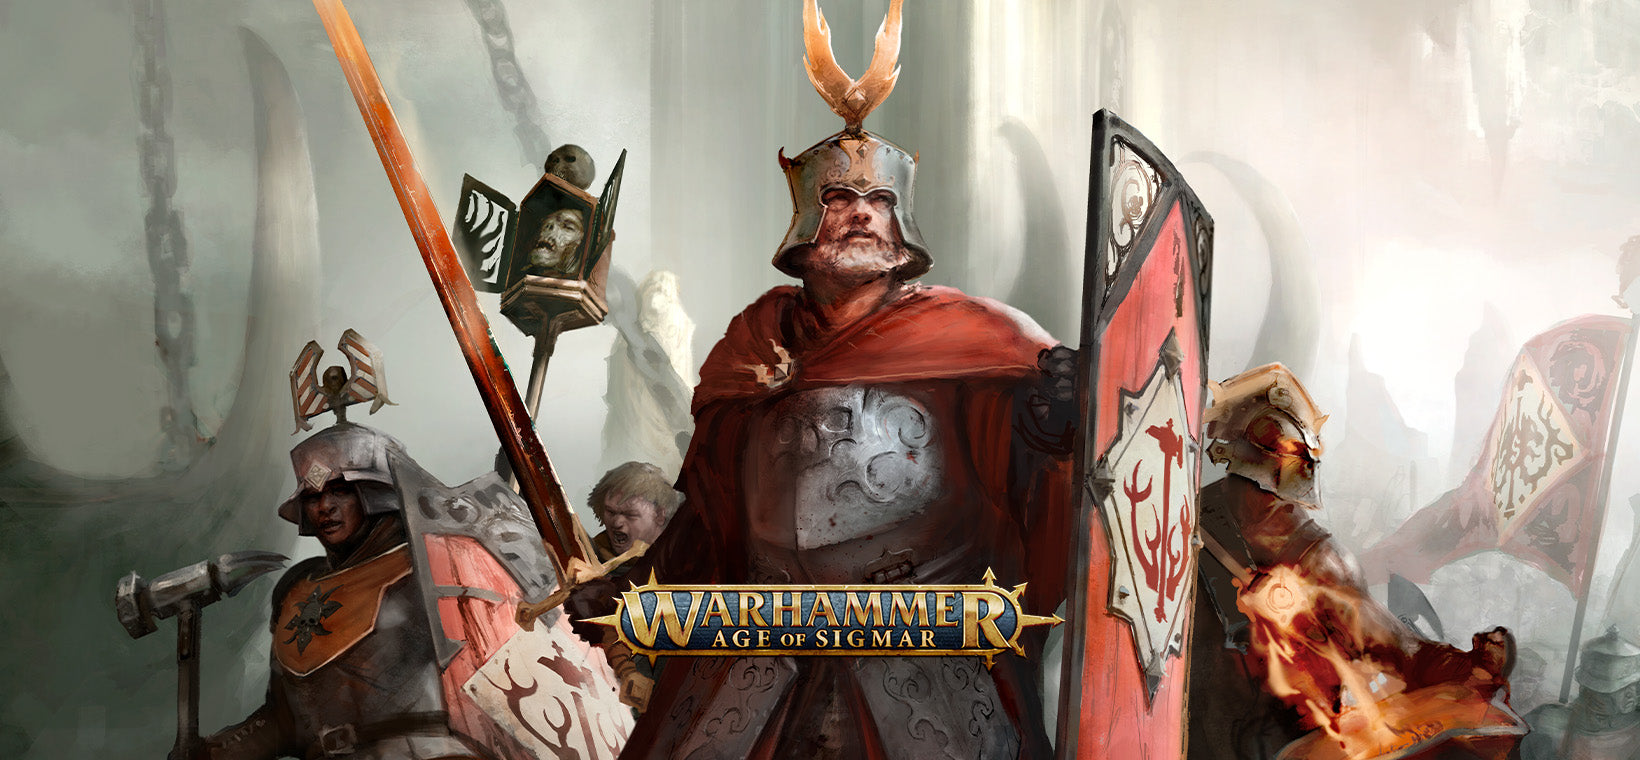 Warhammer Age of Sigmar - The Ultimate Fantasy Miniatures Game